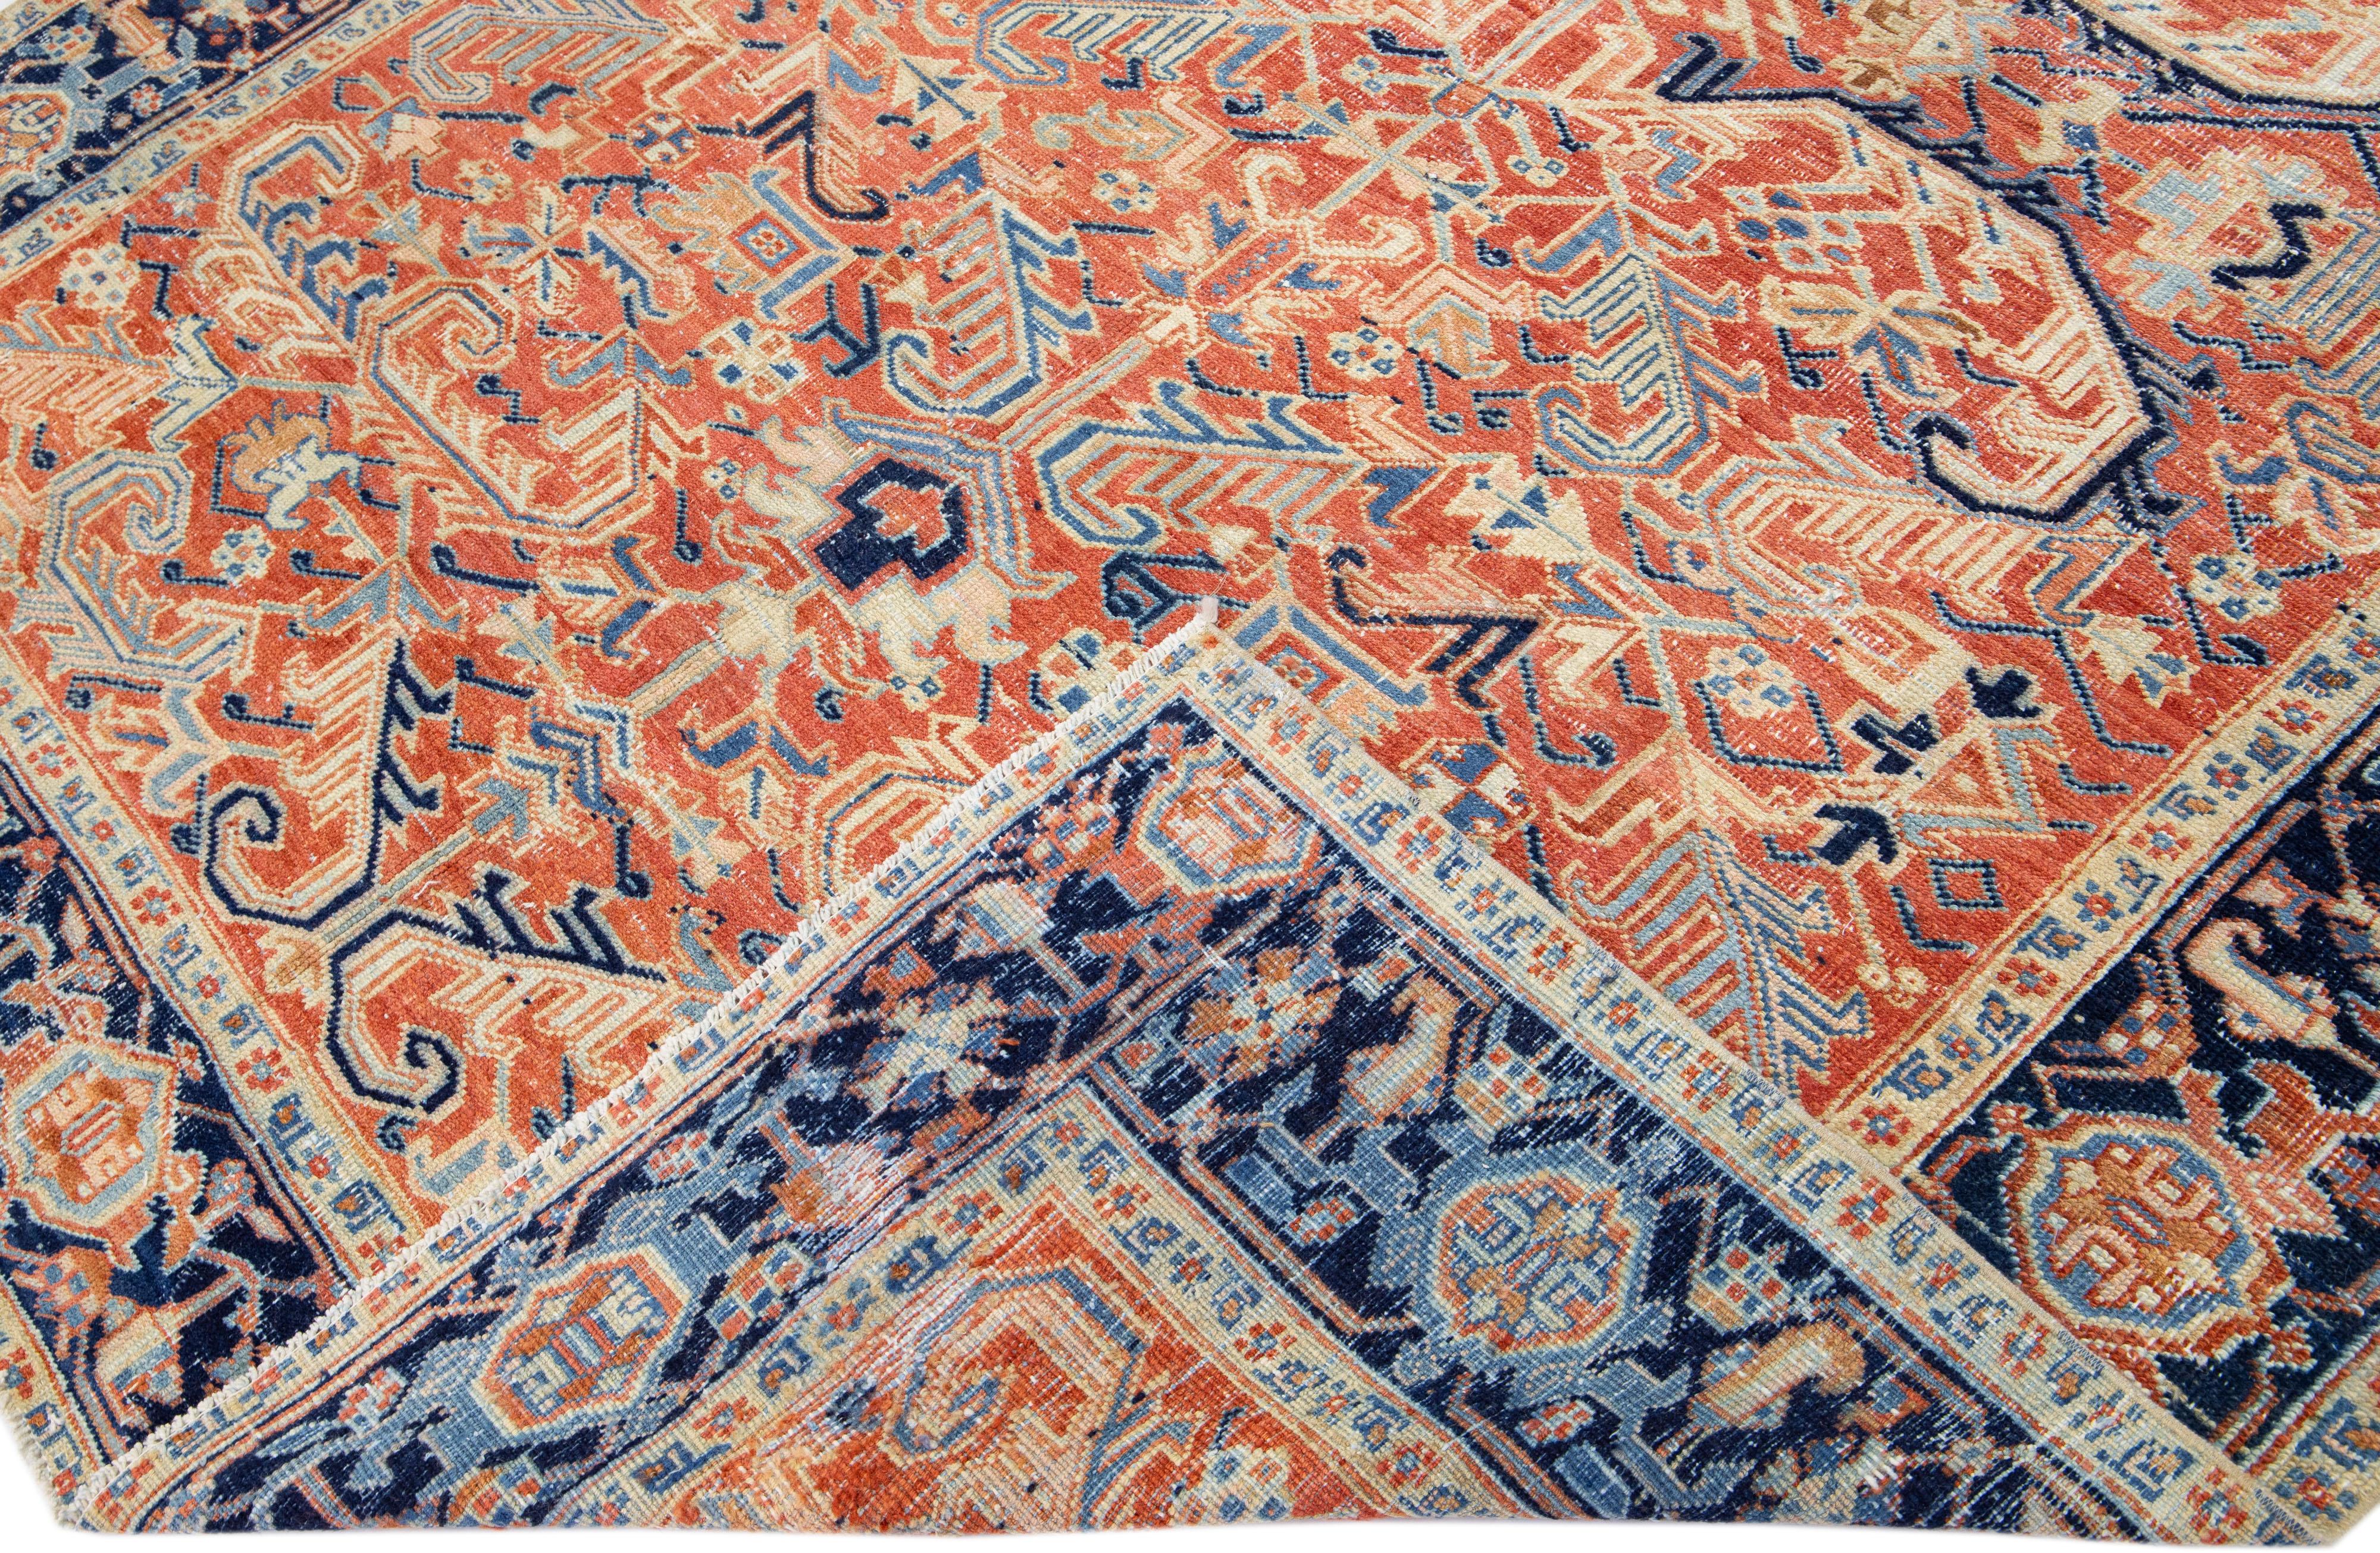 Beautiful antique Heriz hand-knotted wool rug with a rust color field. This Persian rug has a blue frame with beige and tan accents in a gorgeous all-over geometric medallion design.

This rug measures: 7'7